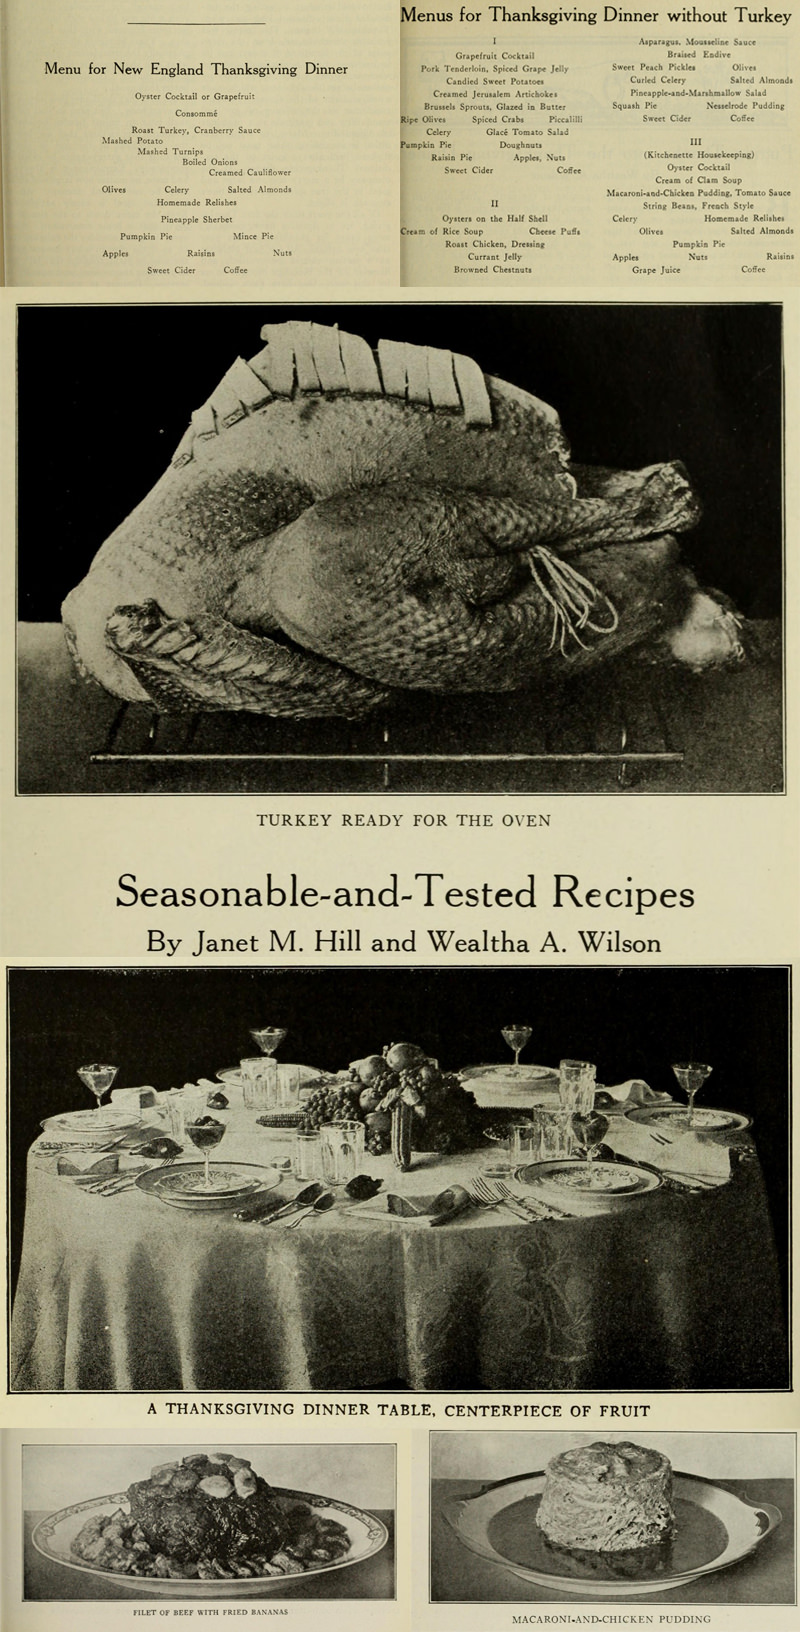 1919 - American Cookery